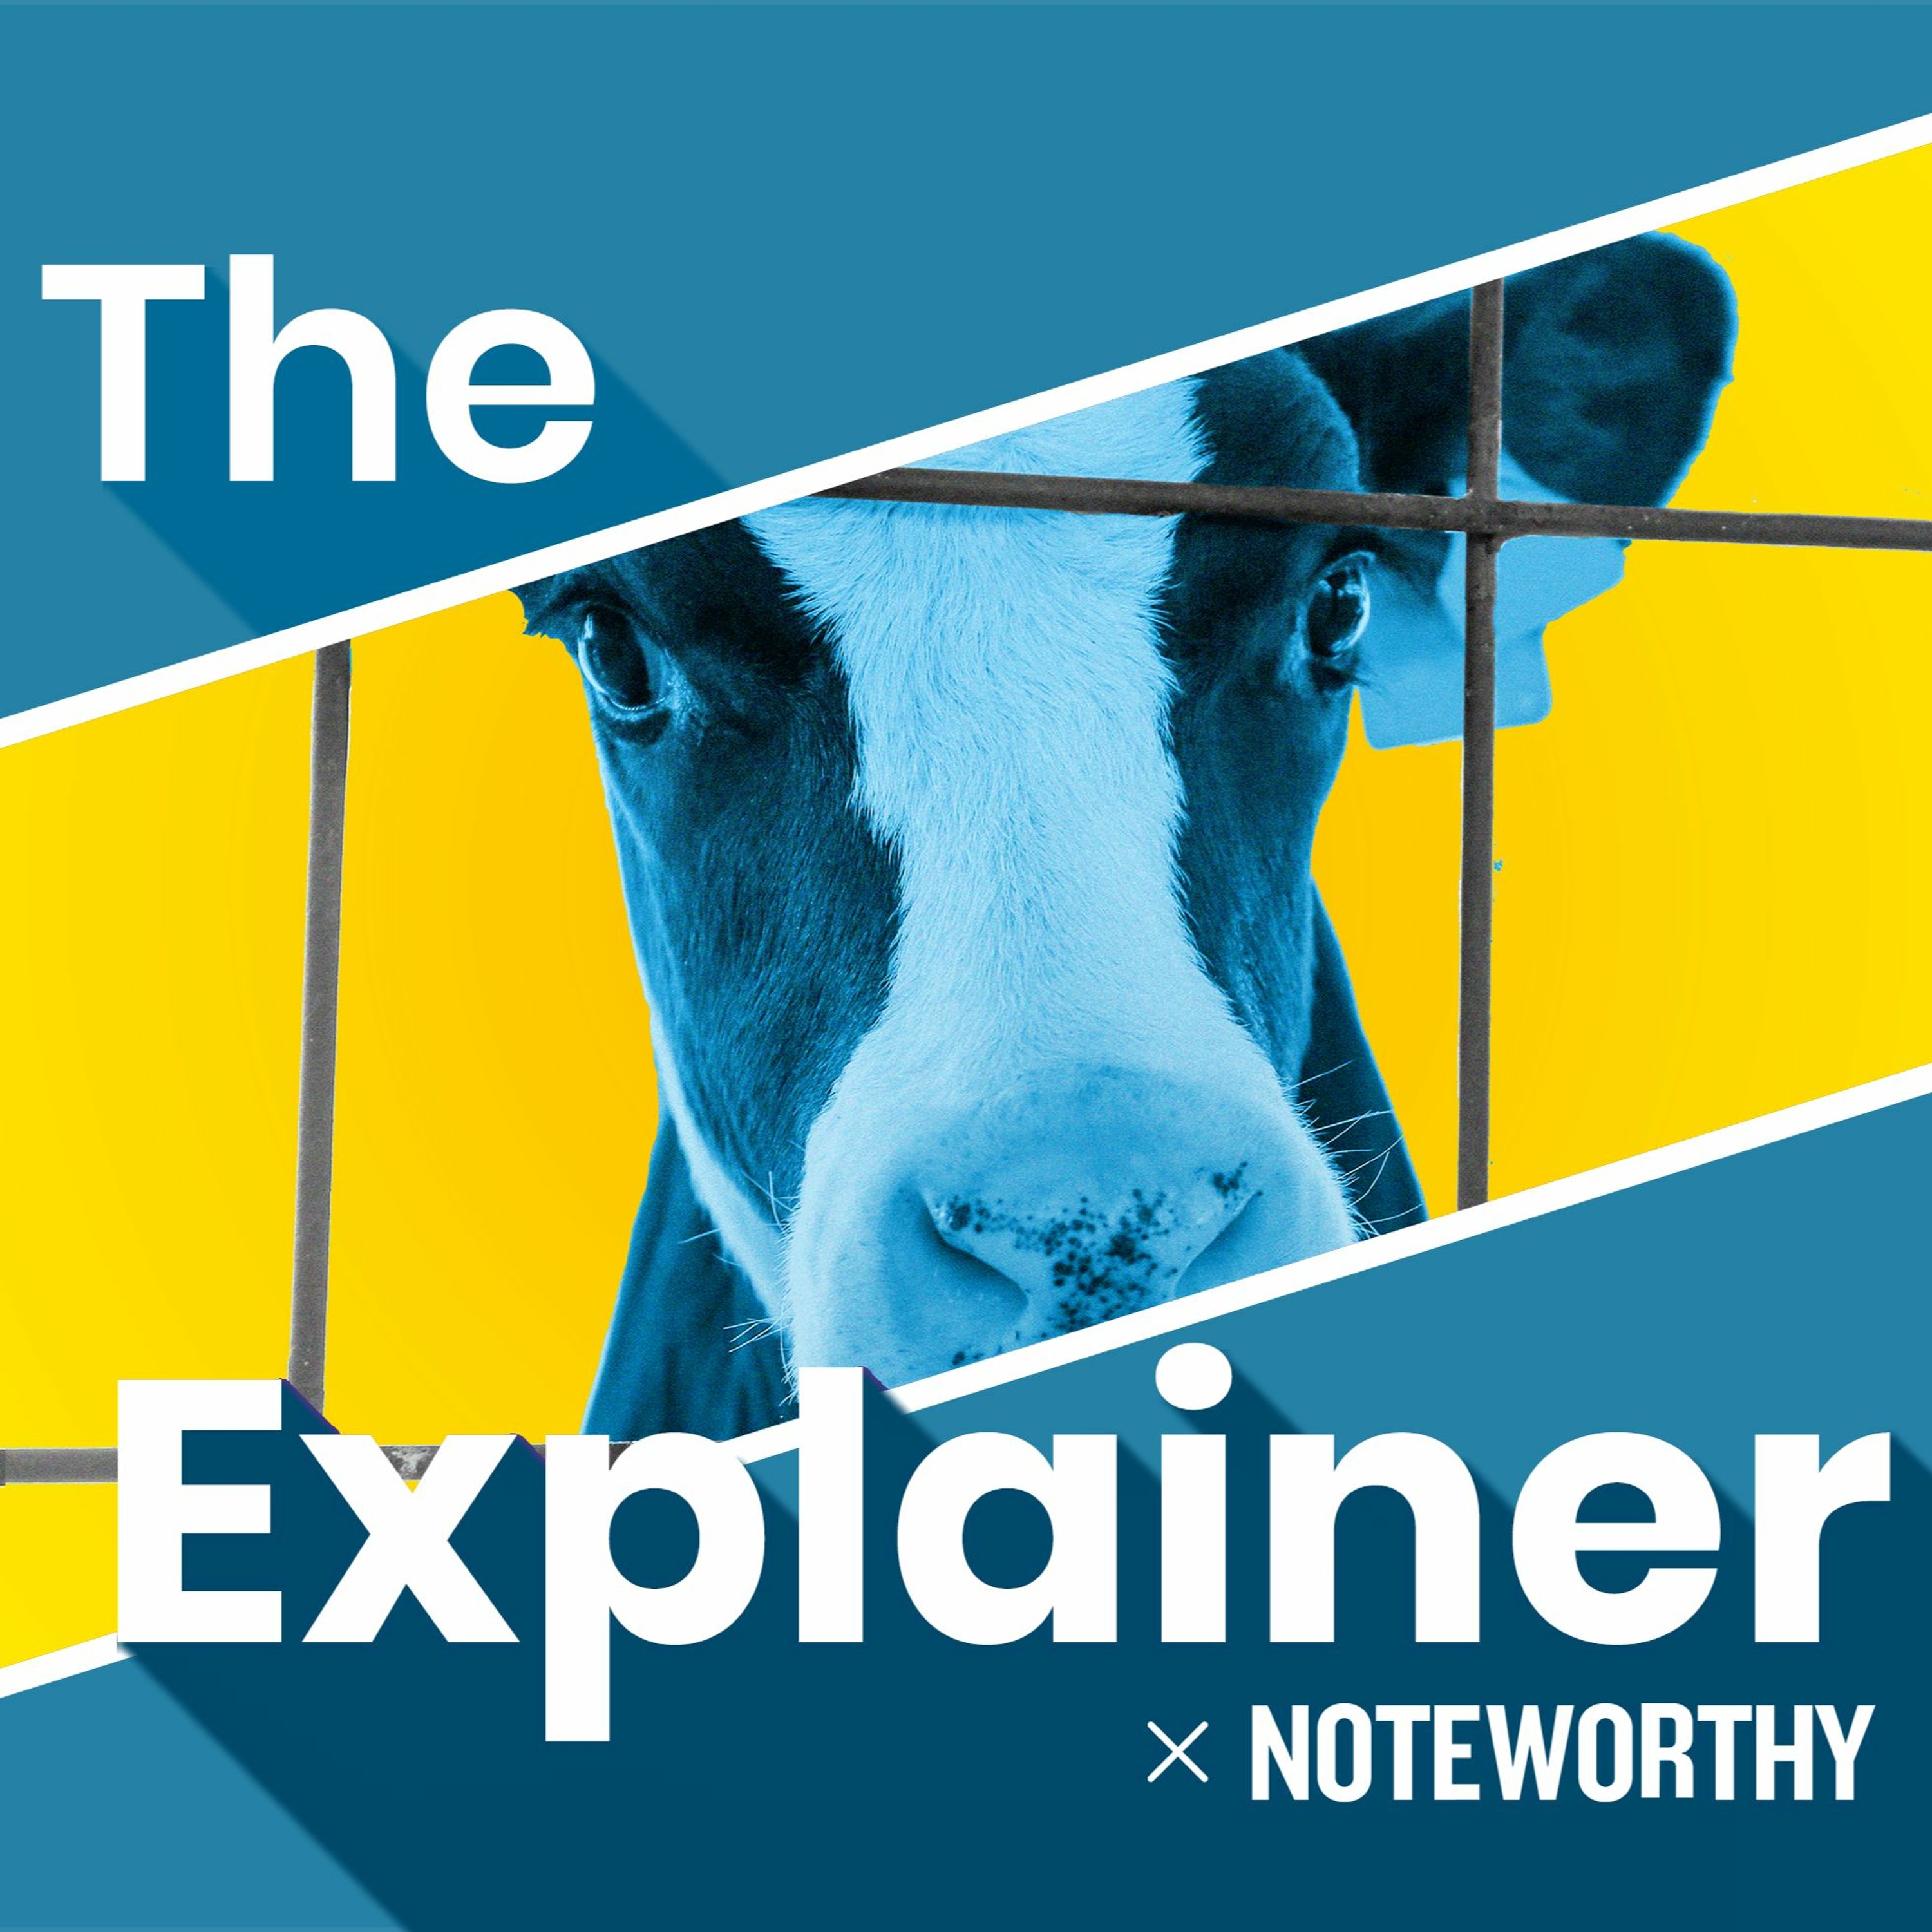 By Noteworthy: Why are Irish unweaned calves being exported?